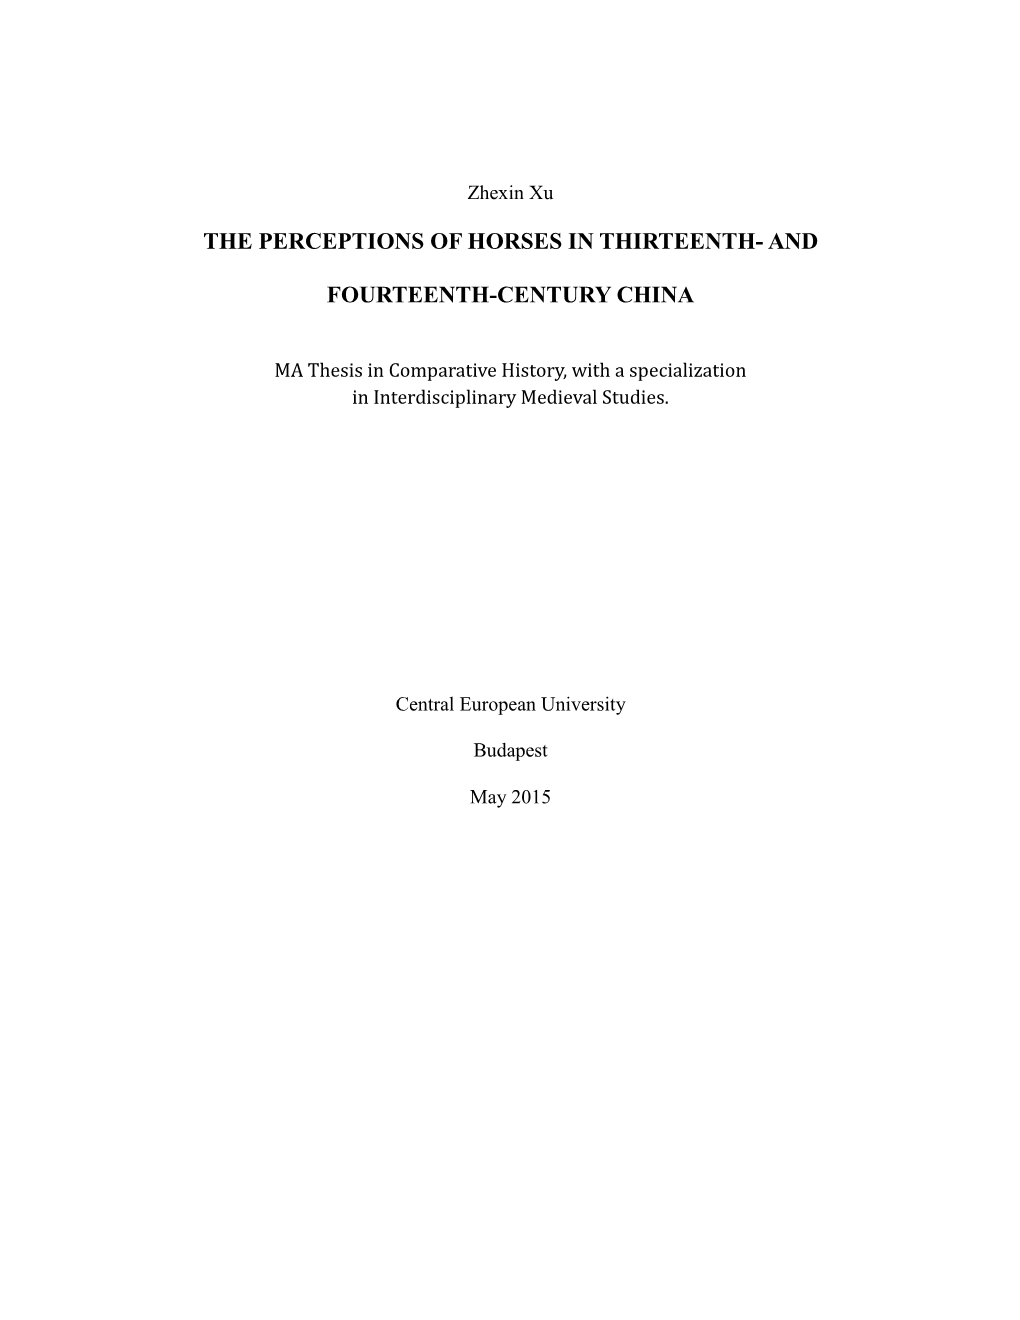 The Perceptions of Horses in Thirteenth- And